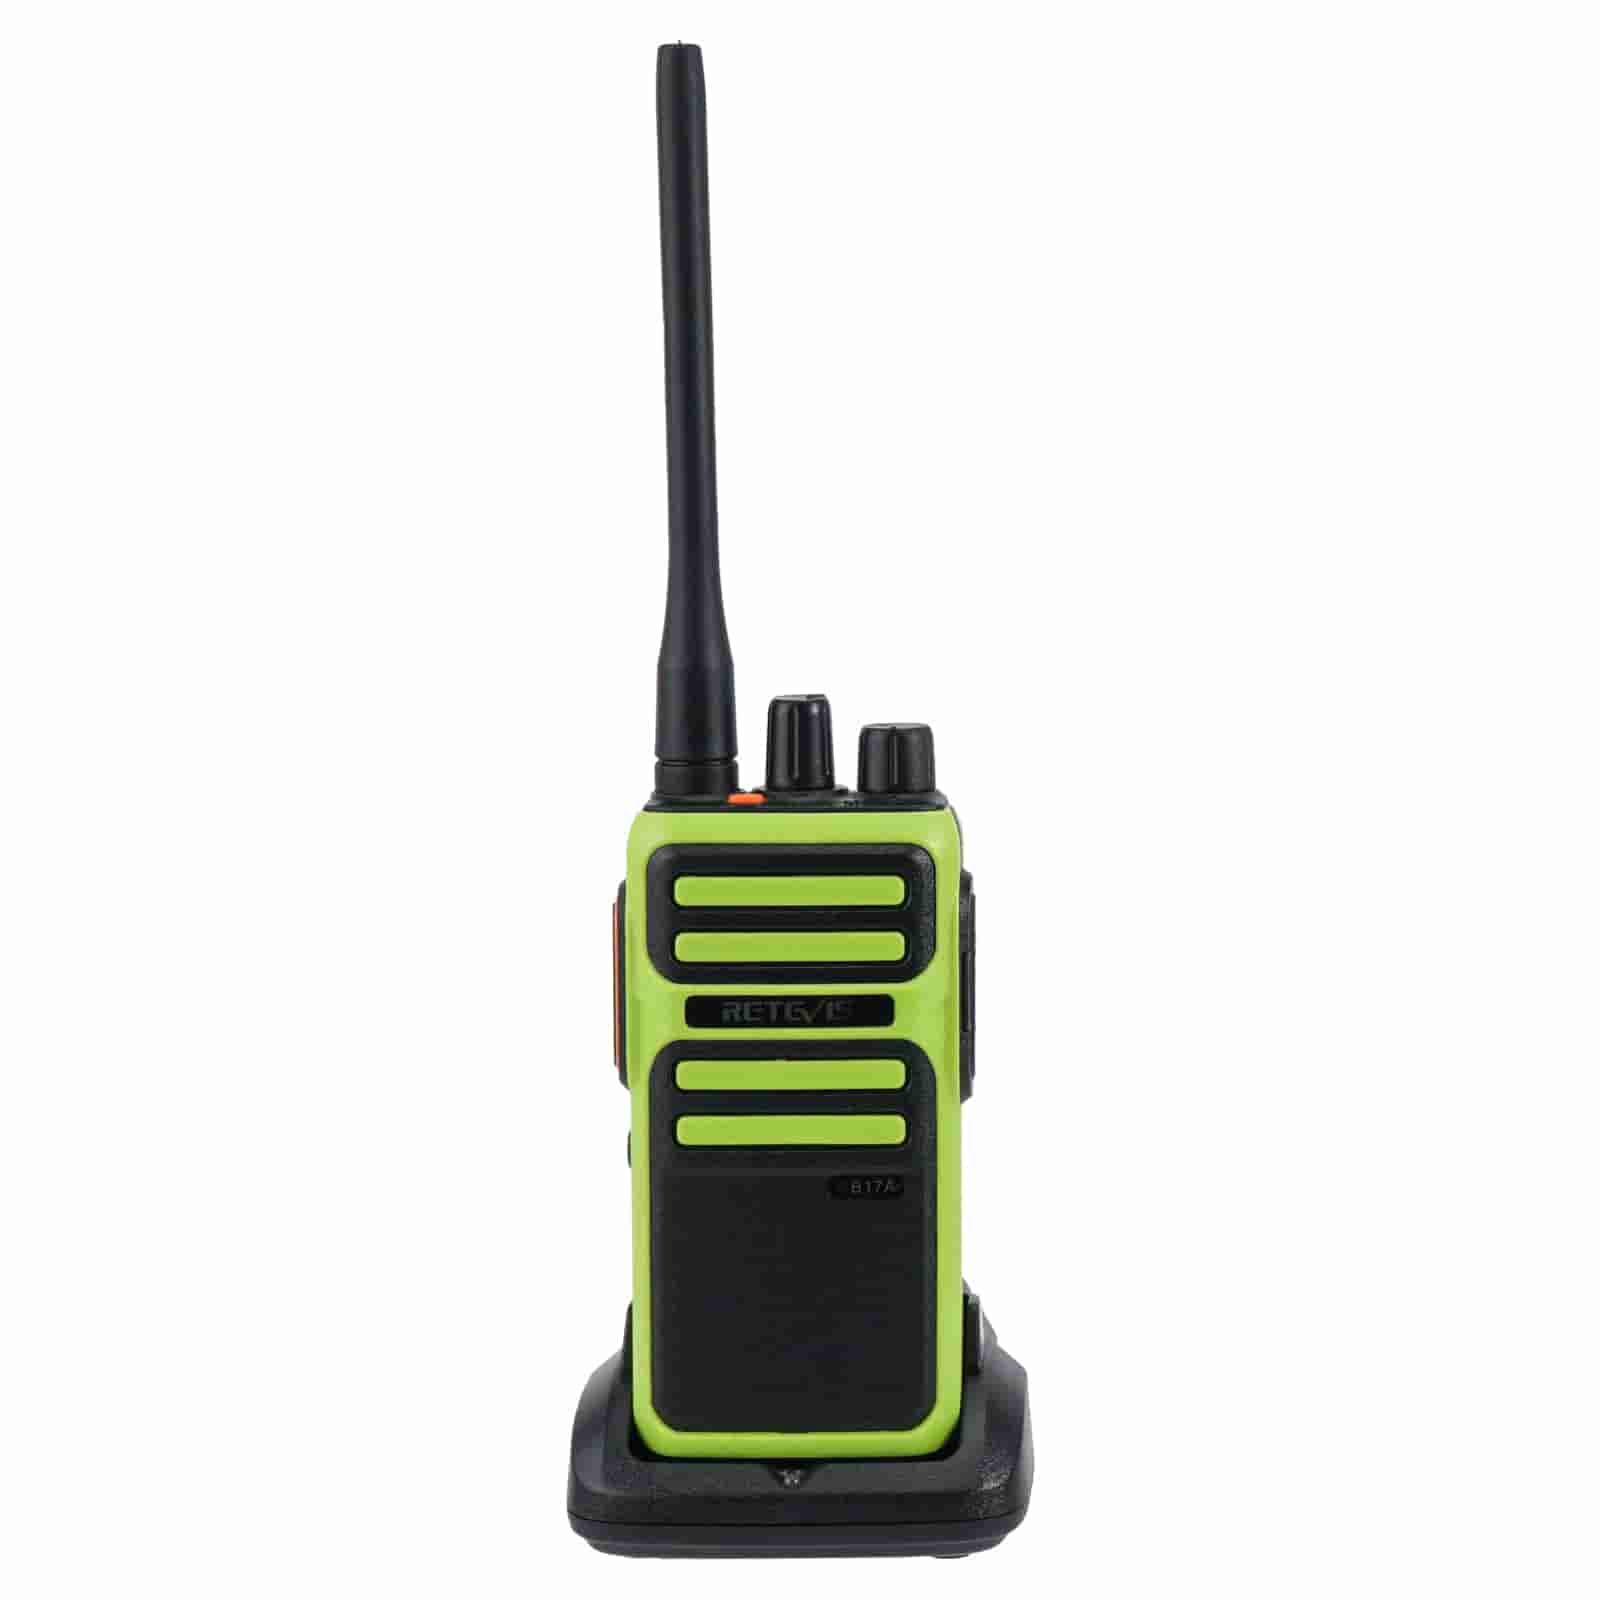 Retevis rb17a gmrs radio